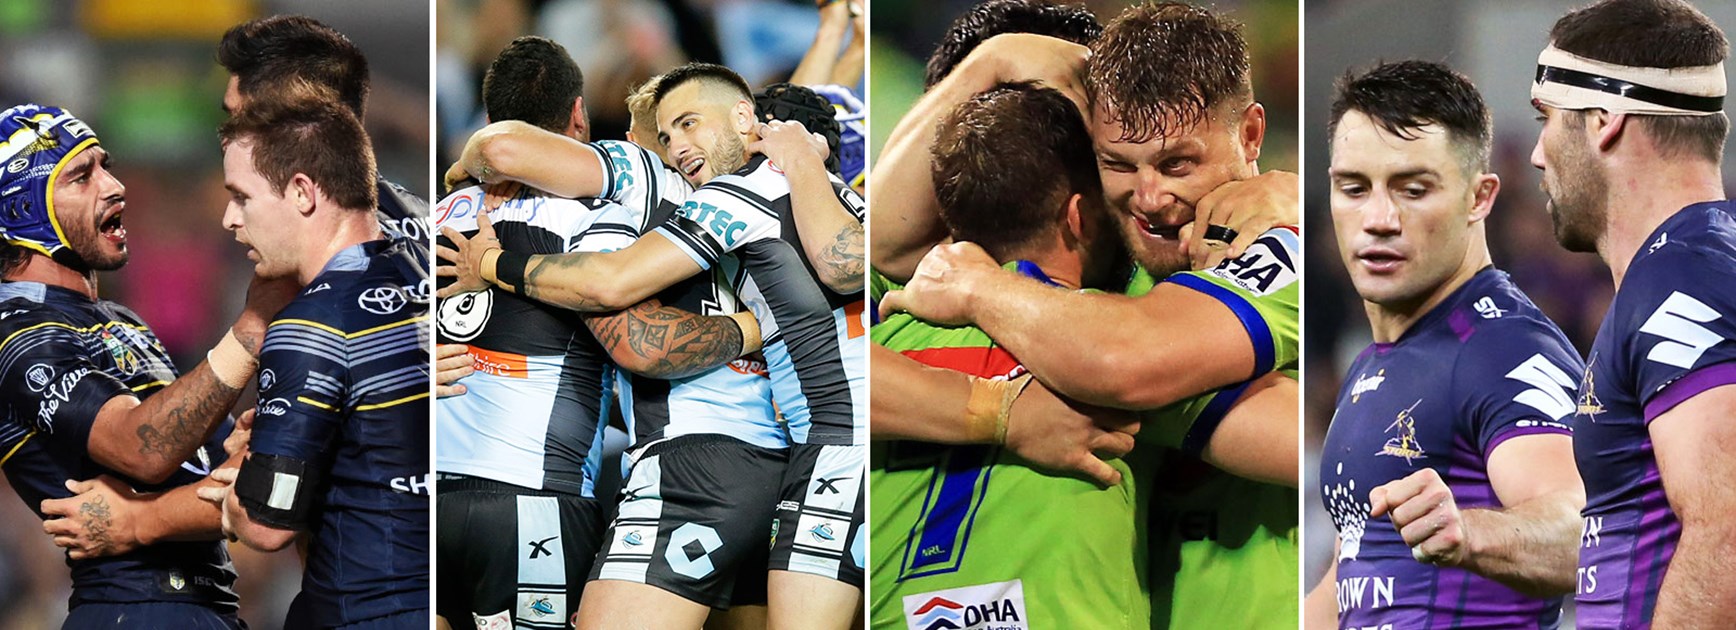 The Cowboys, Sharks, Raiders and Storm will be looking to remain at the top of the league next season.